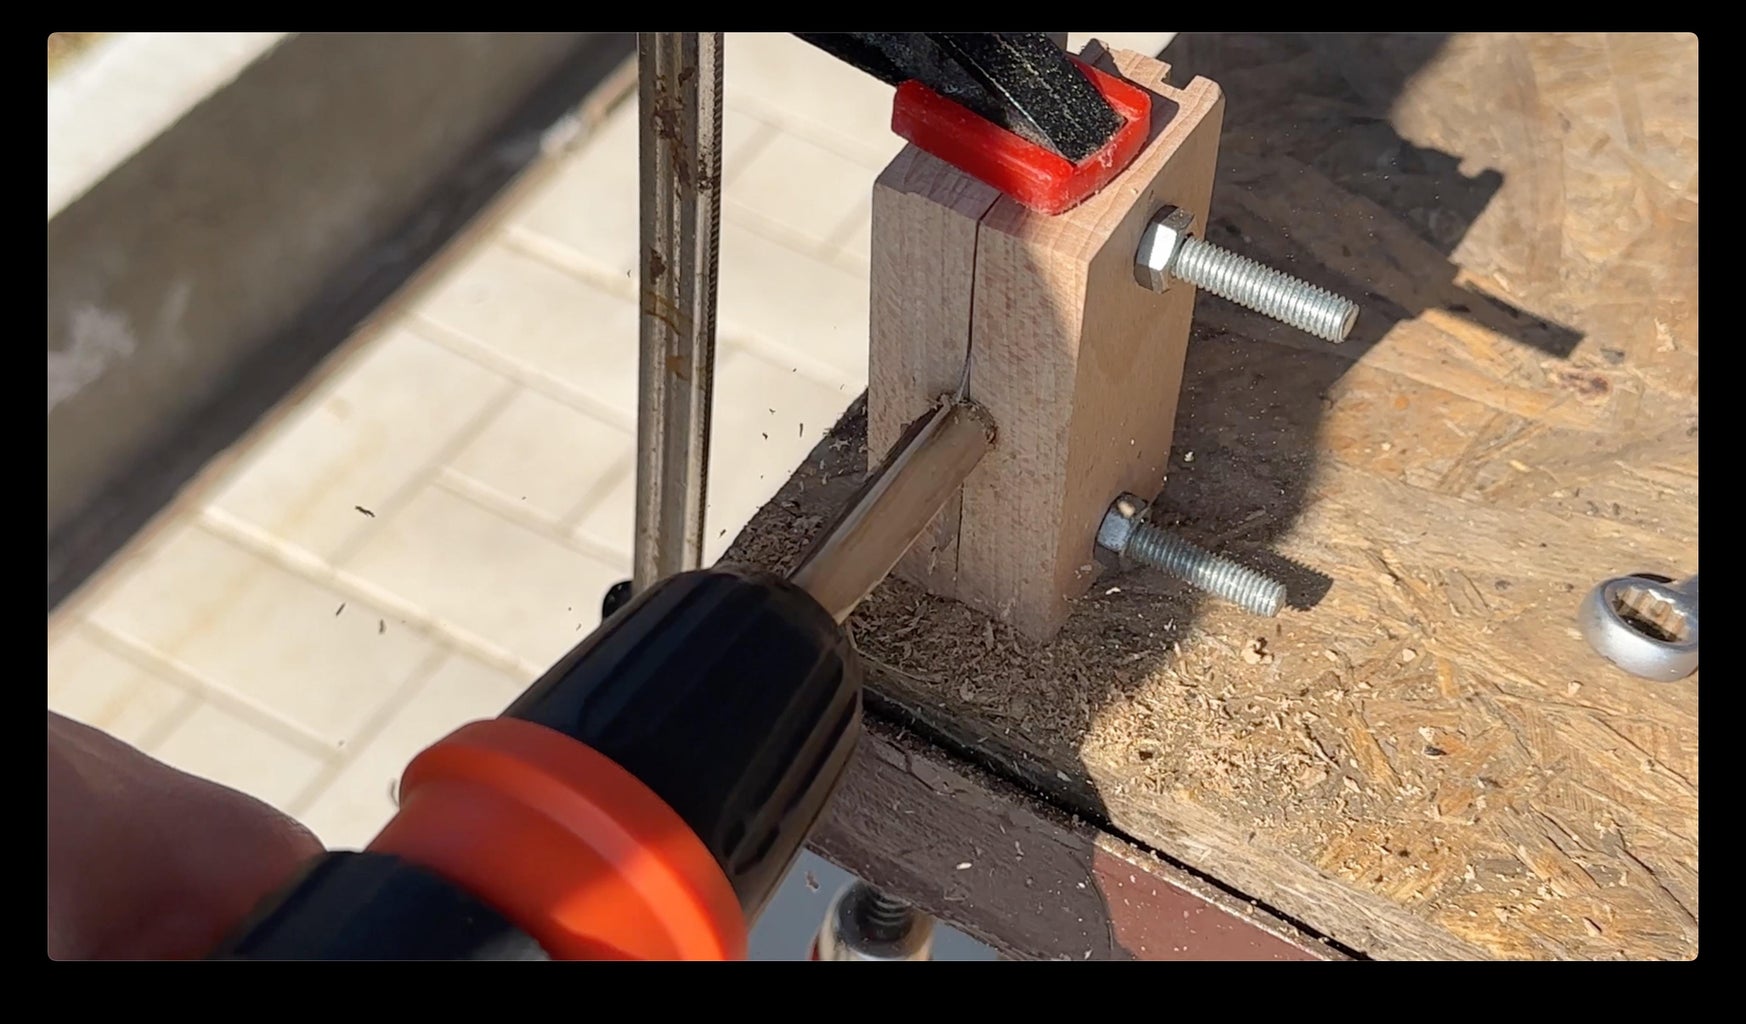 Making Wooden Axis (sticks)